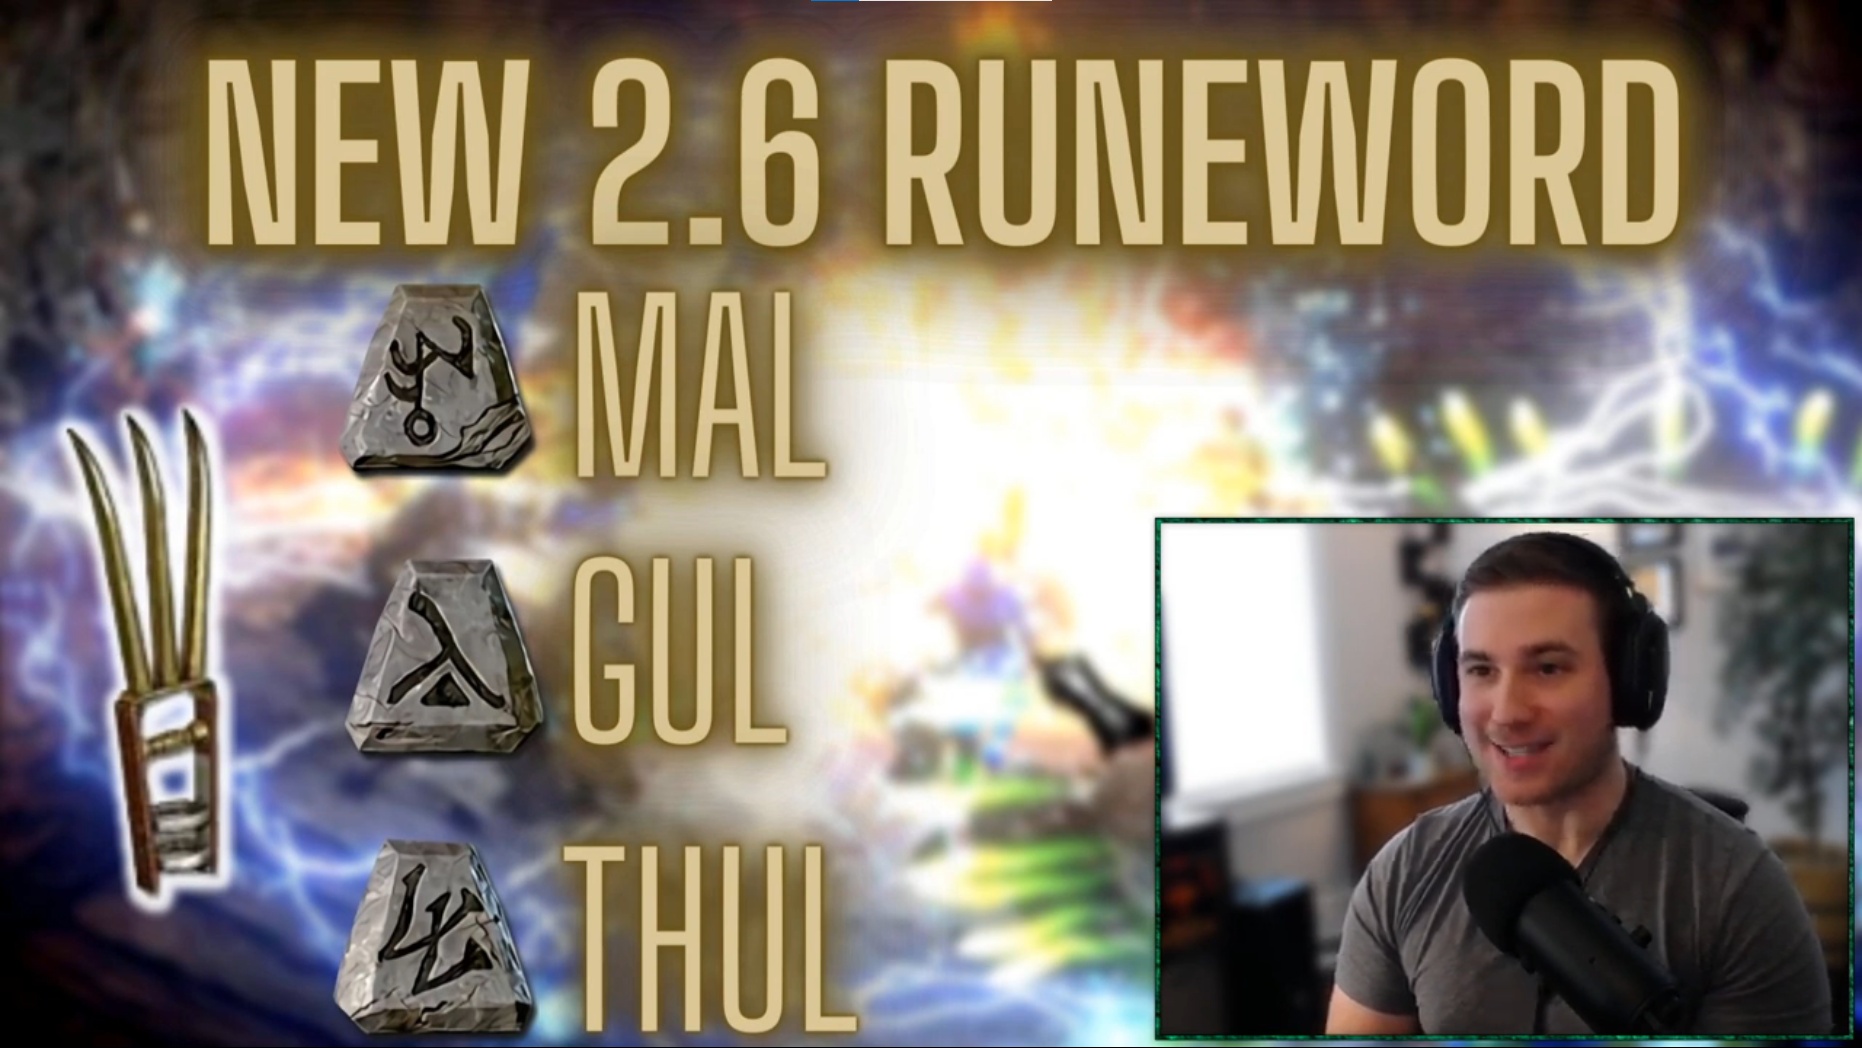 New Assassin Runeword "Mosaic" Revealed for Patch 2.6 in Diablo II: Resurrected thumbnail